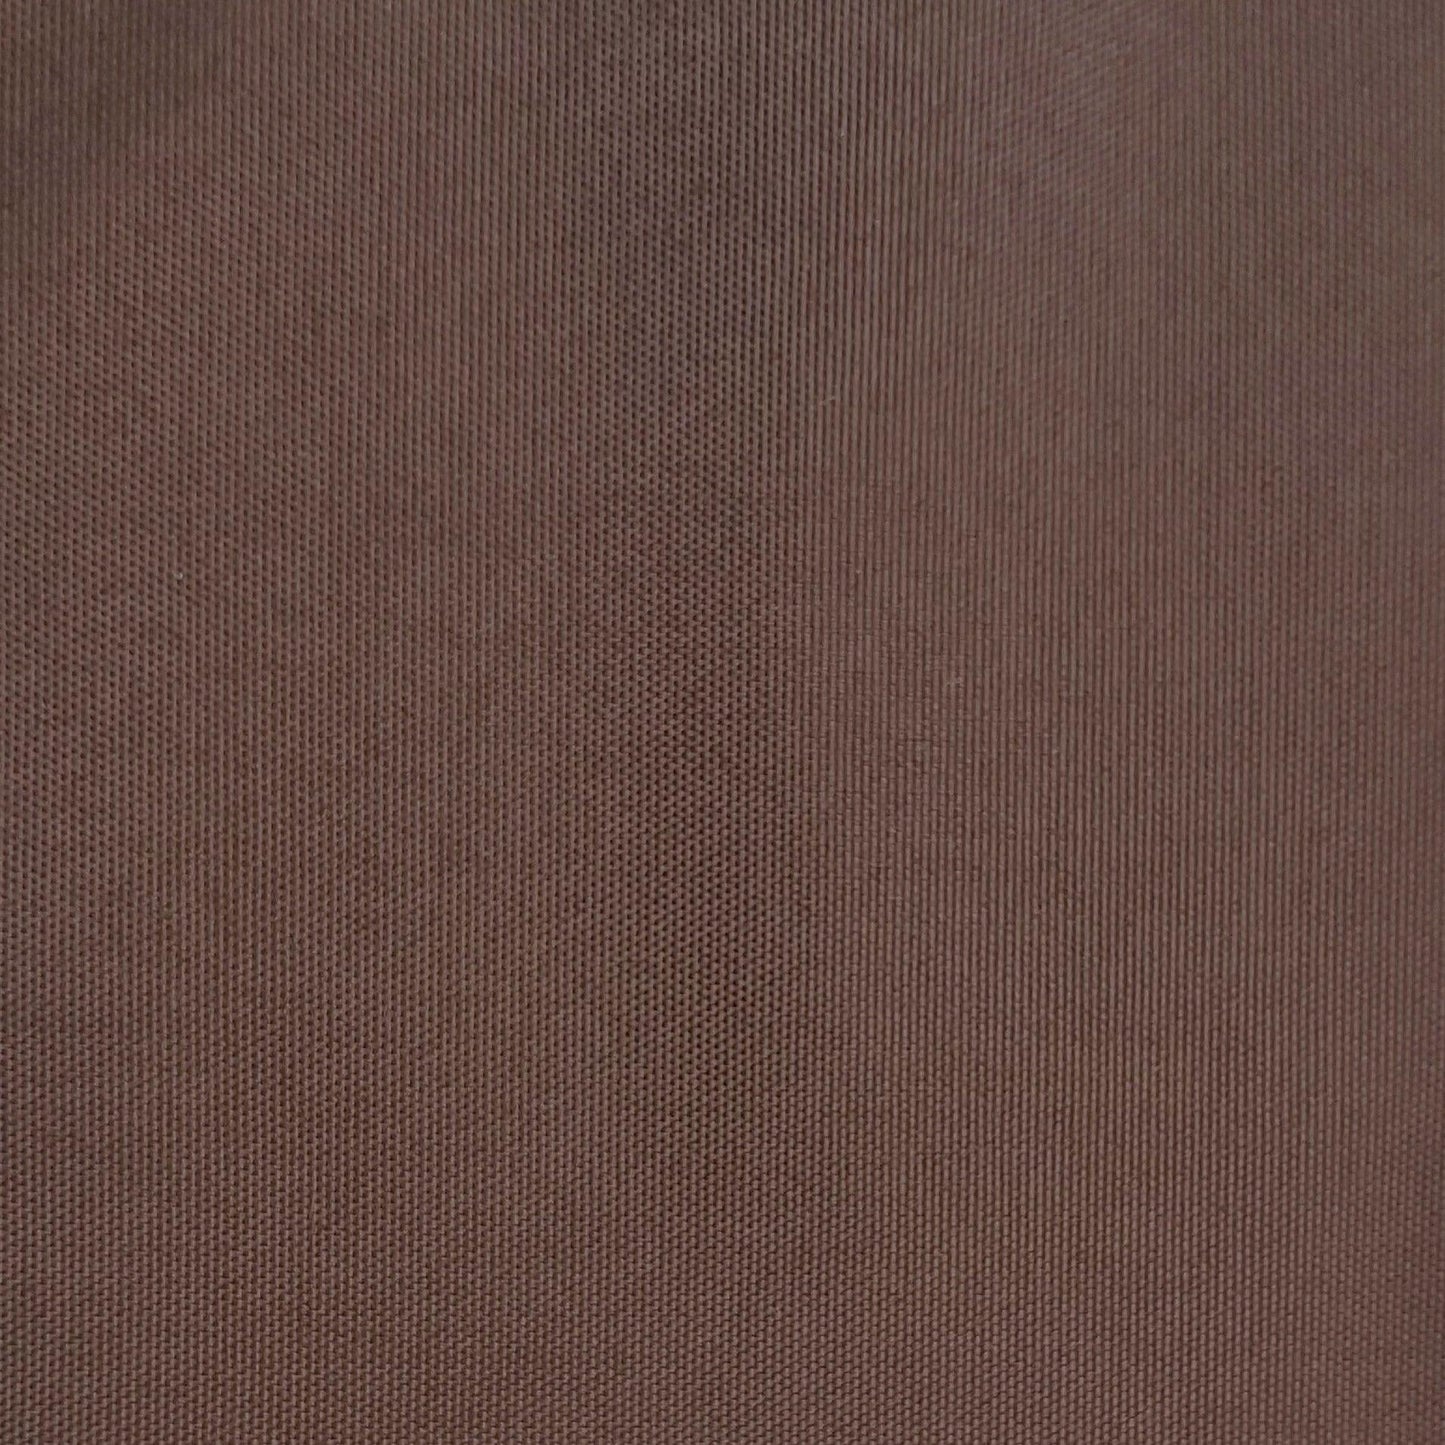 Outdoor Upholstery Fabric Cottage Brown